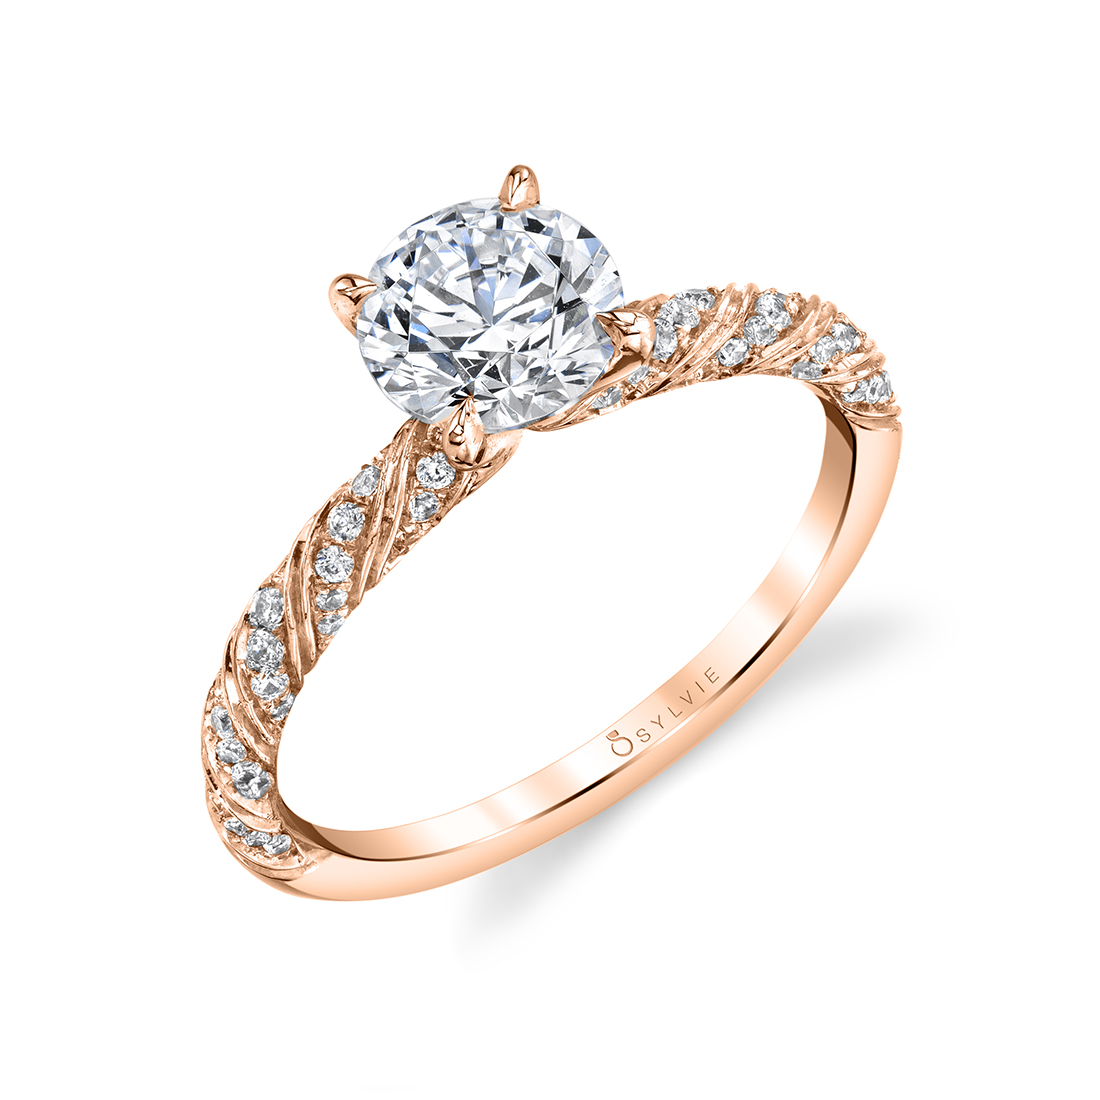 Unique Engagement Ring in rose gold - Gianna